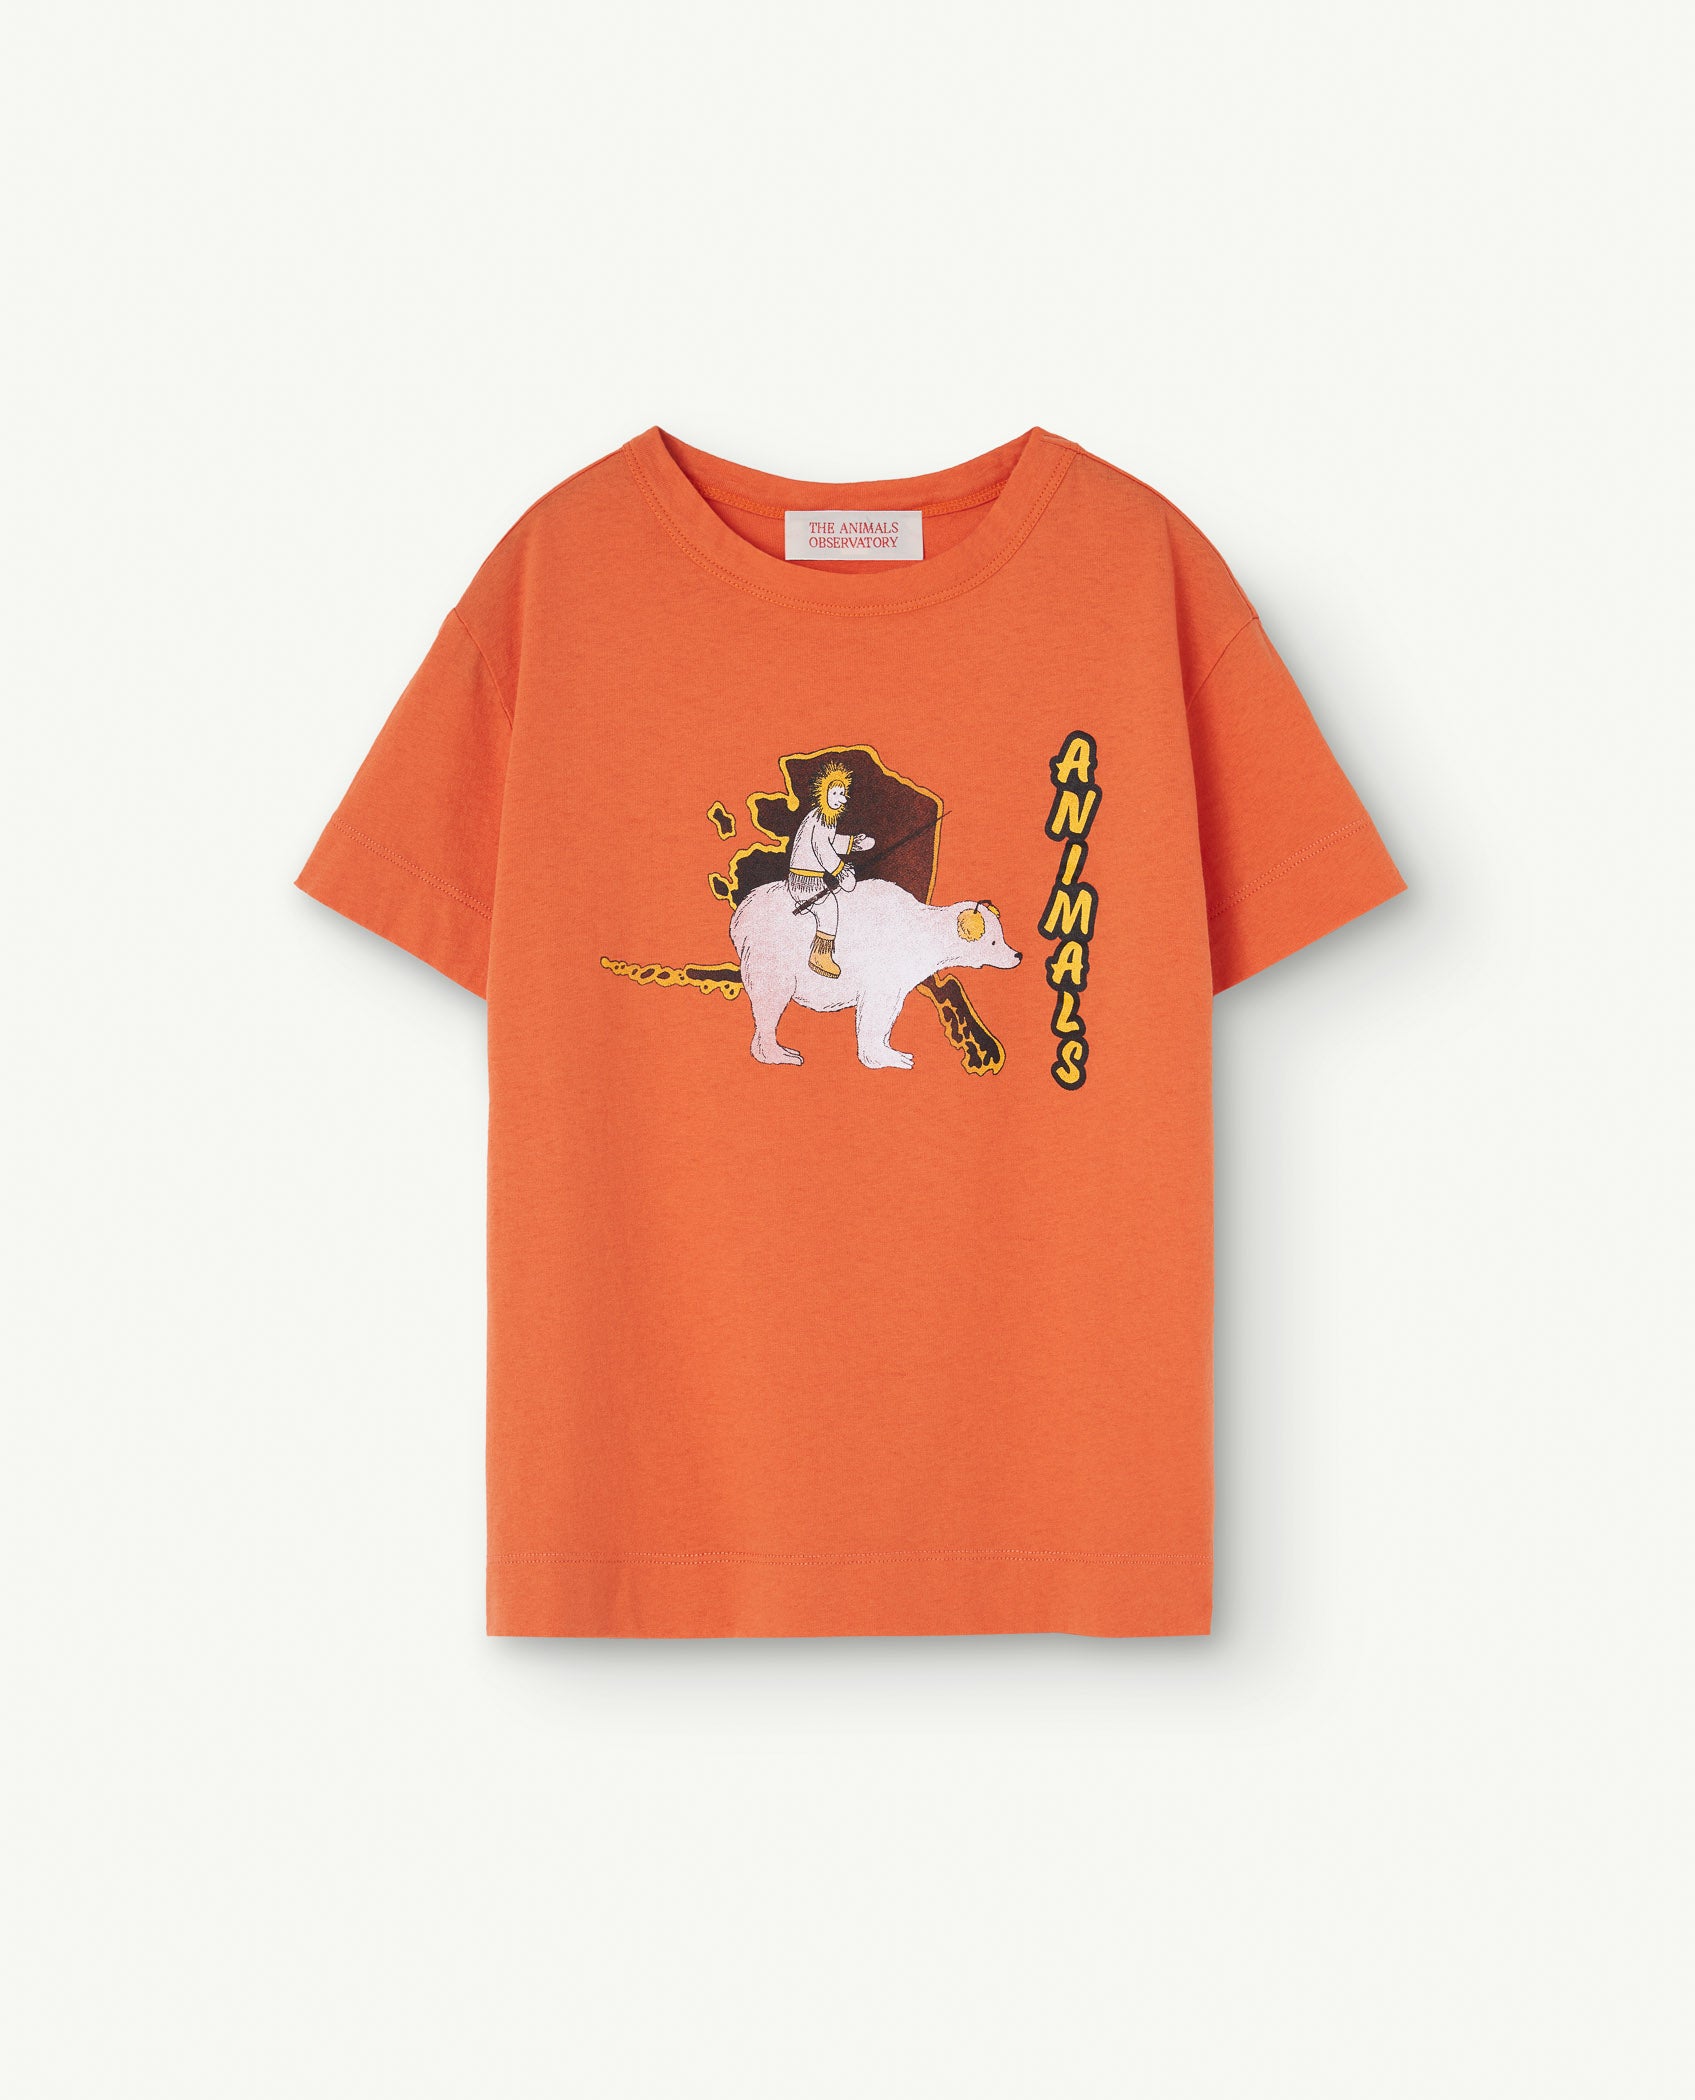 The Animals Observatory - rooster - kids t-shirt - orange